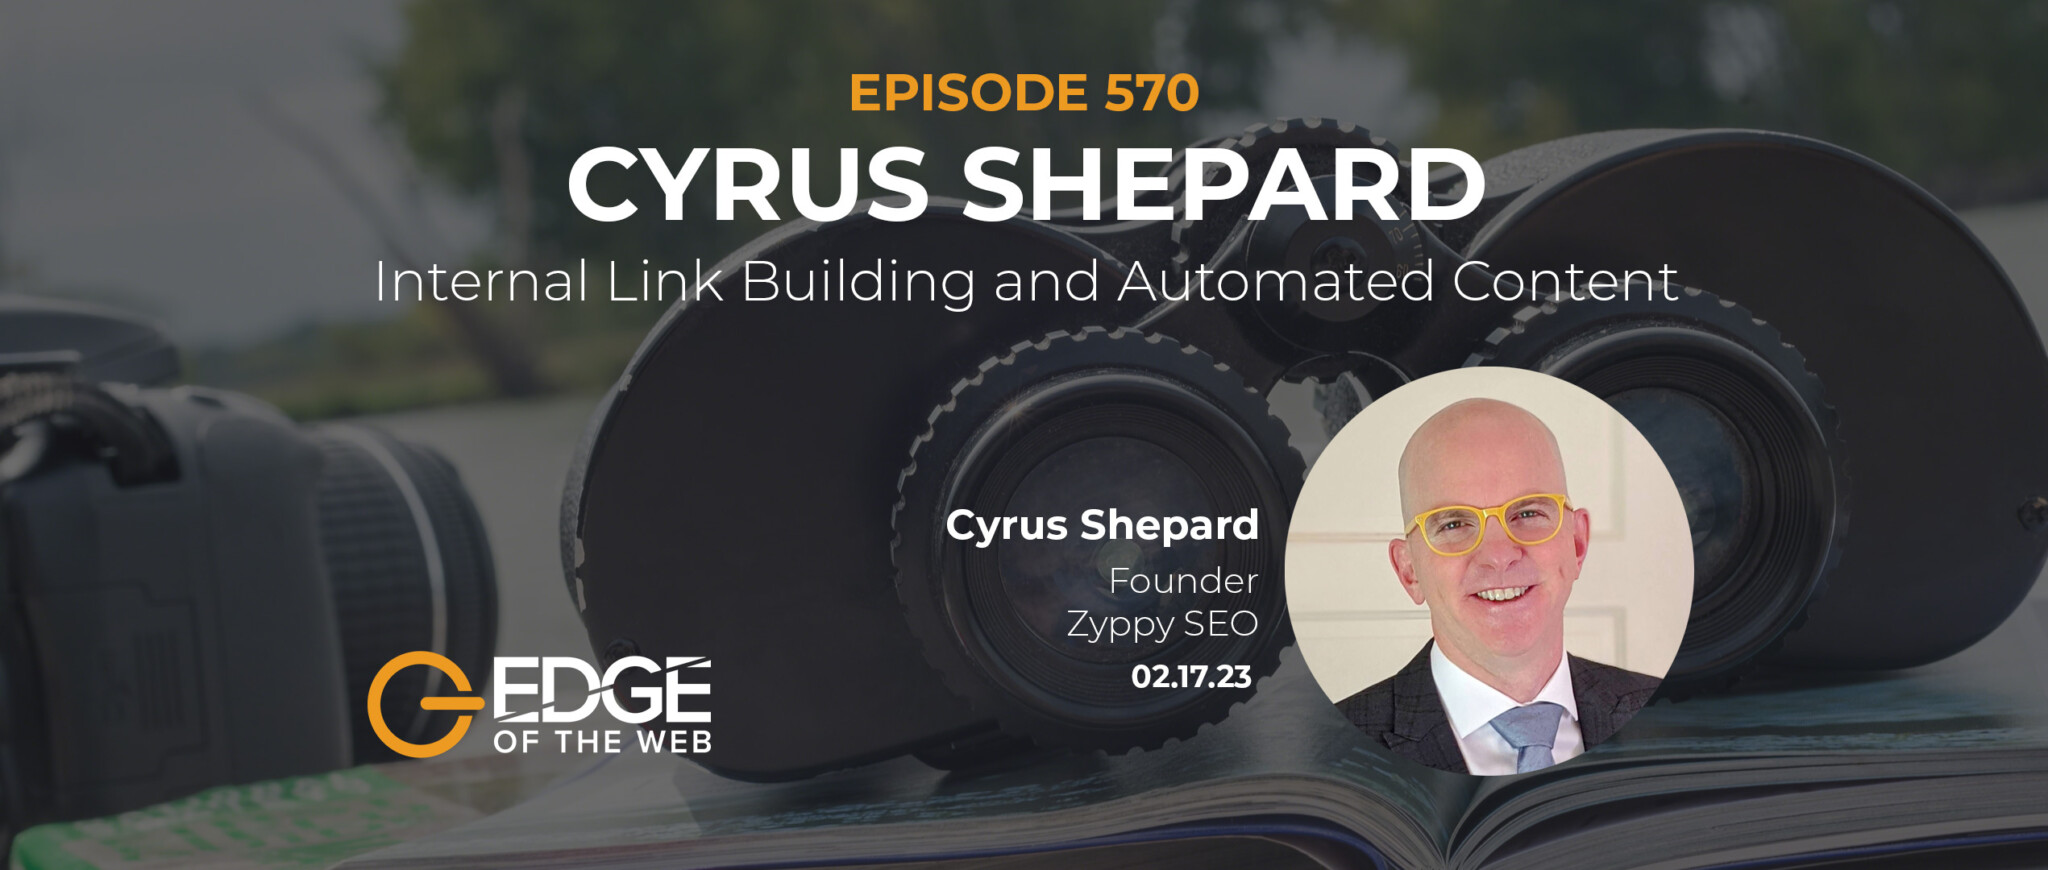 Cyrus Shepard EDGE Episode 570 Featured Image